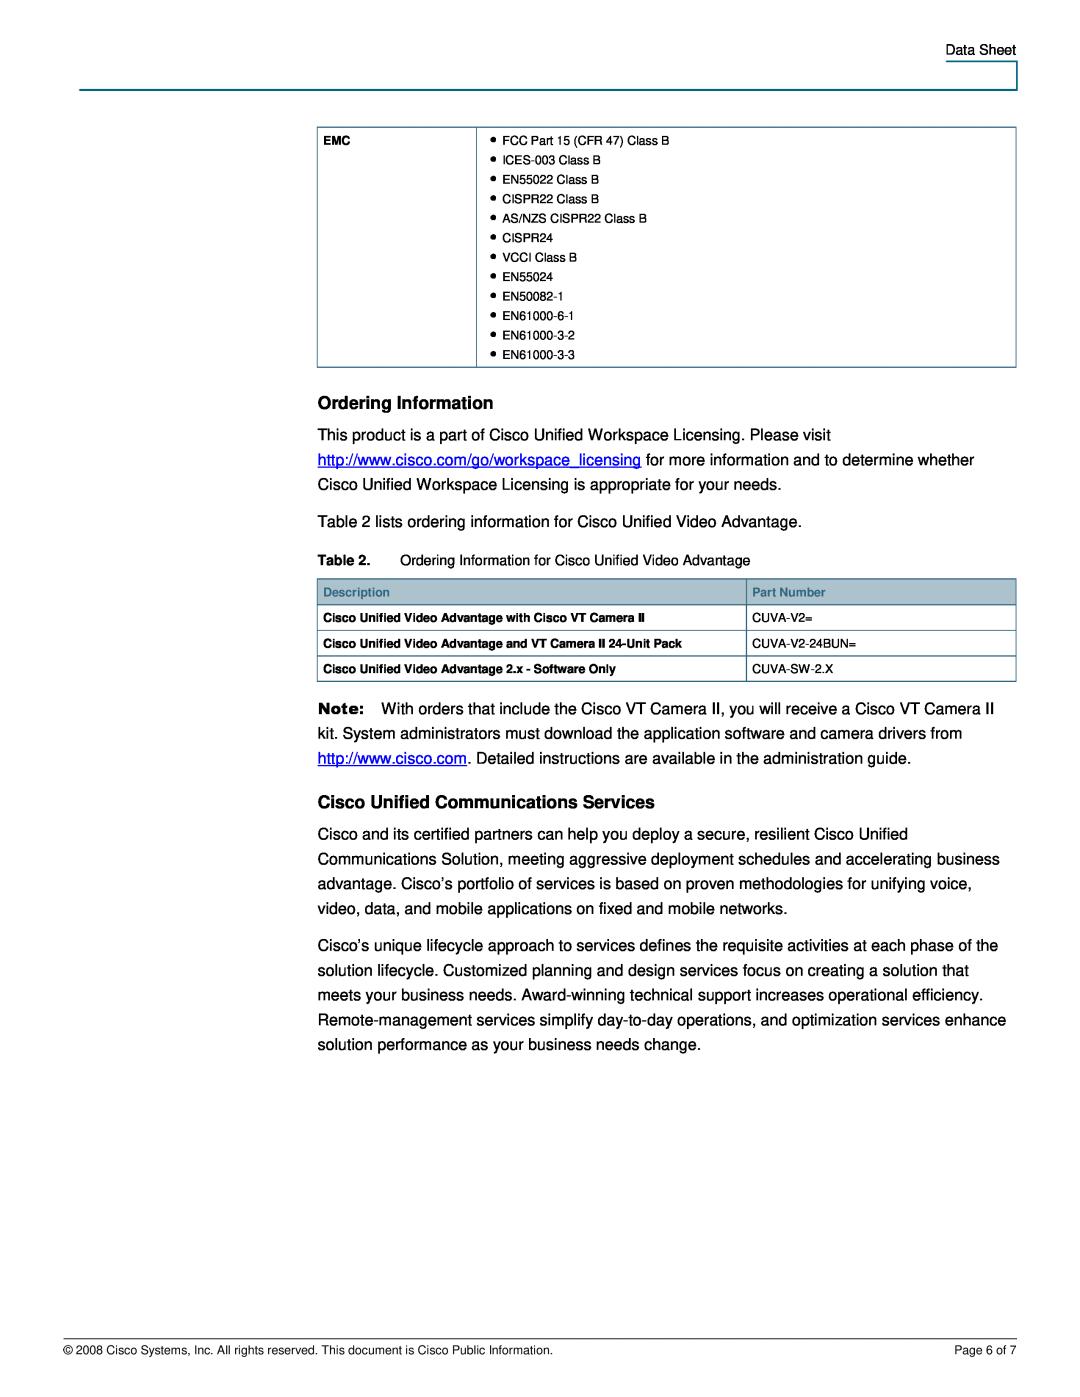 Cisco Systems CUVAV224BUN manual Ordering Information, Cisco Unified Communications Services 